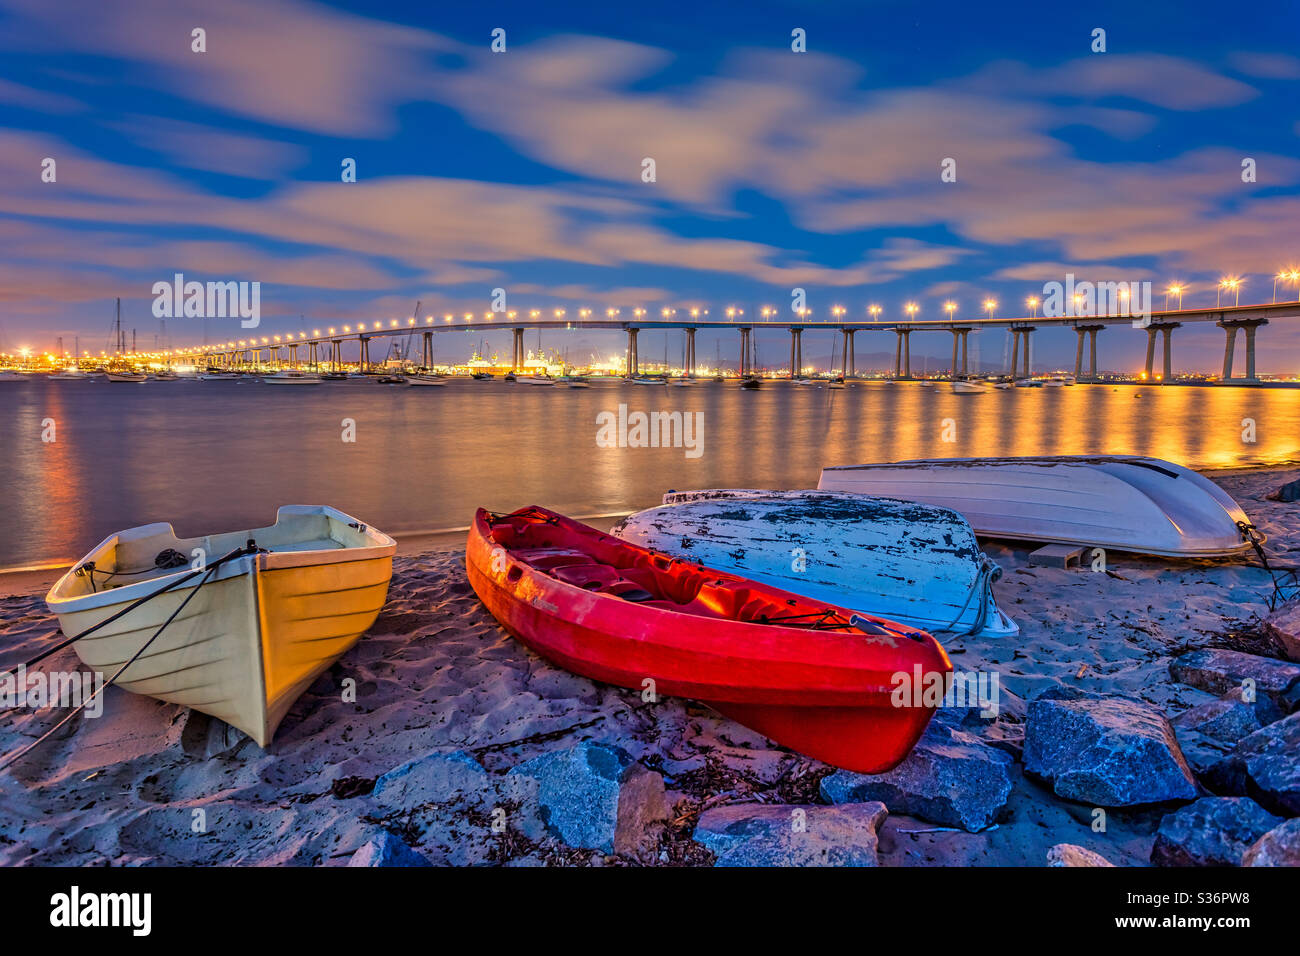 Colorful dinghy boats in the foreground with the Coronado Bay bridge in the distance under a cloudy twilight sky Stock Photo